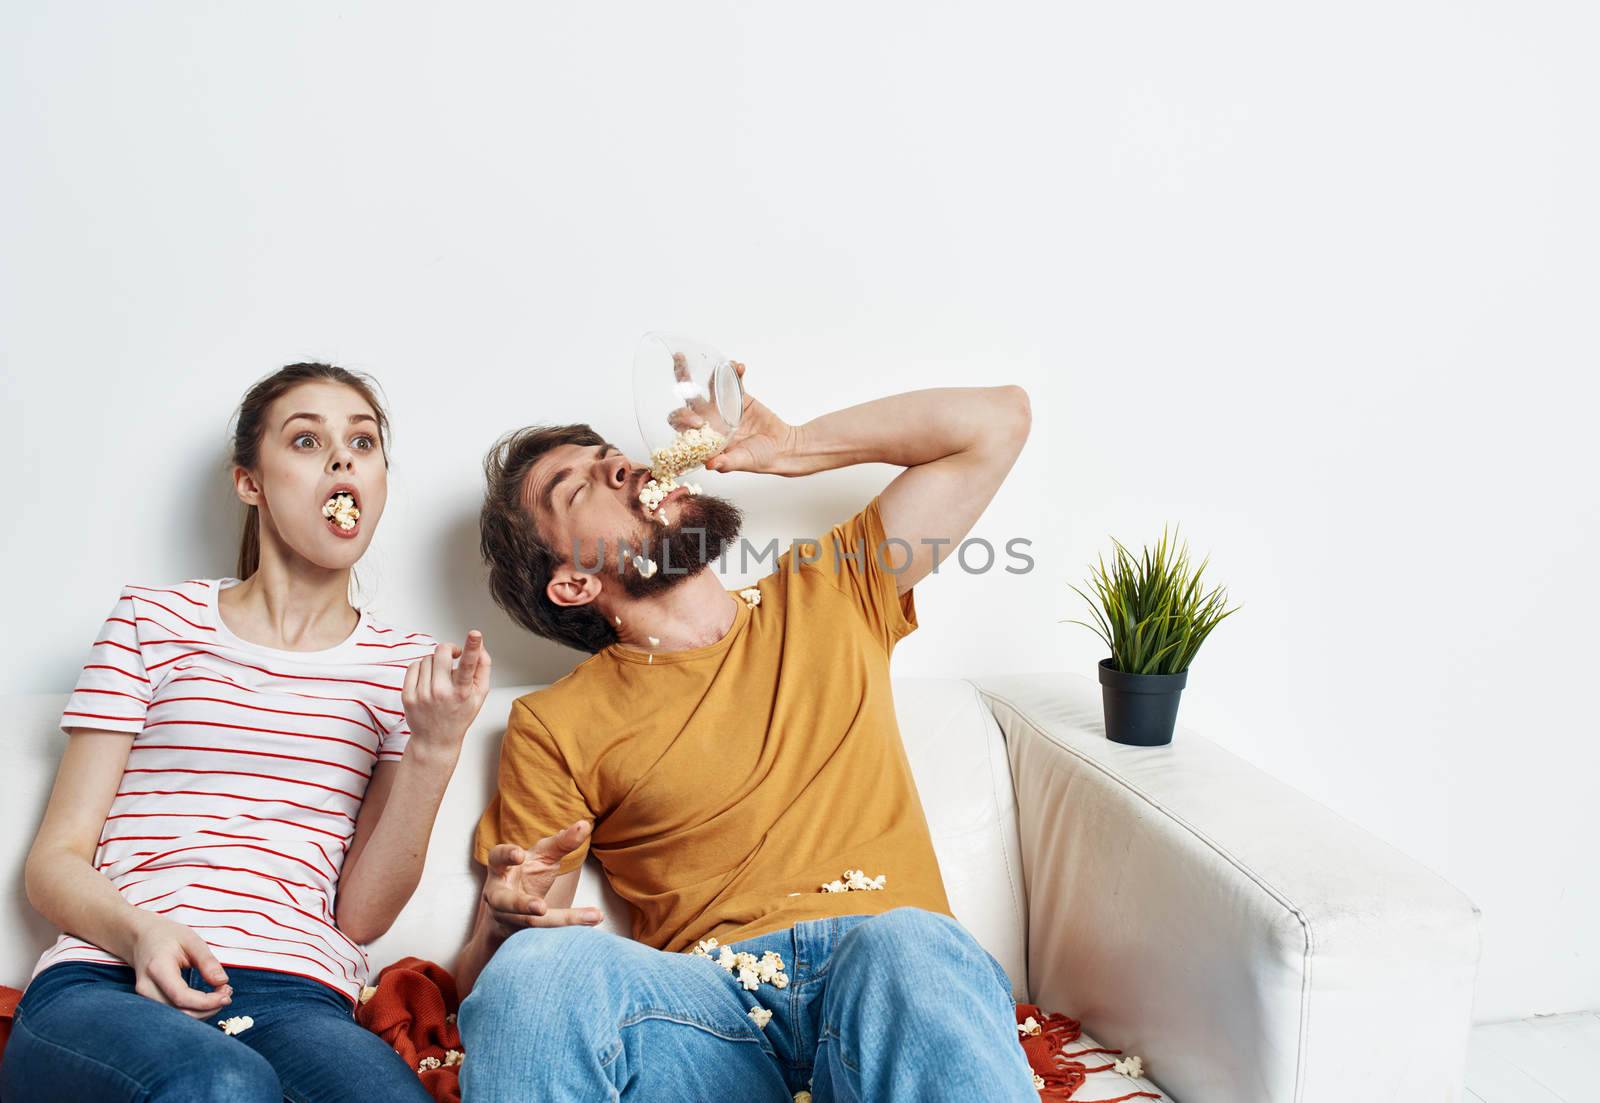 Man and woman watching movies indoors with popcorn and flower in a pot by SHOTPRIME